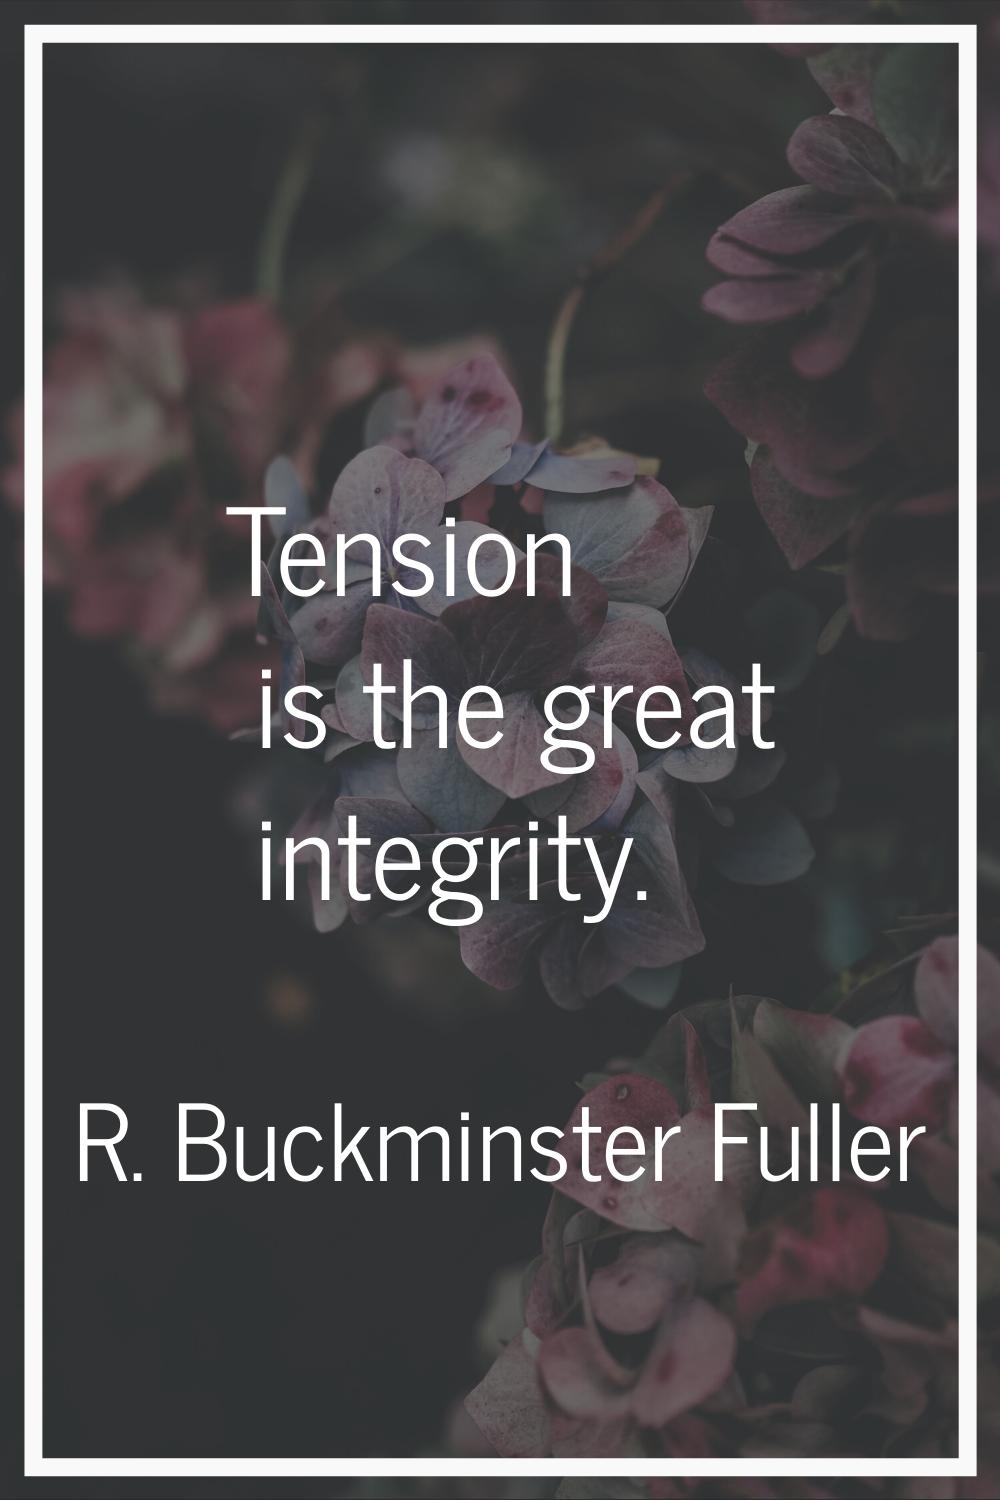 Tension is the great integrity.